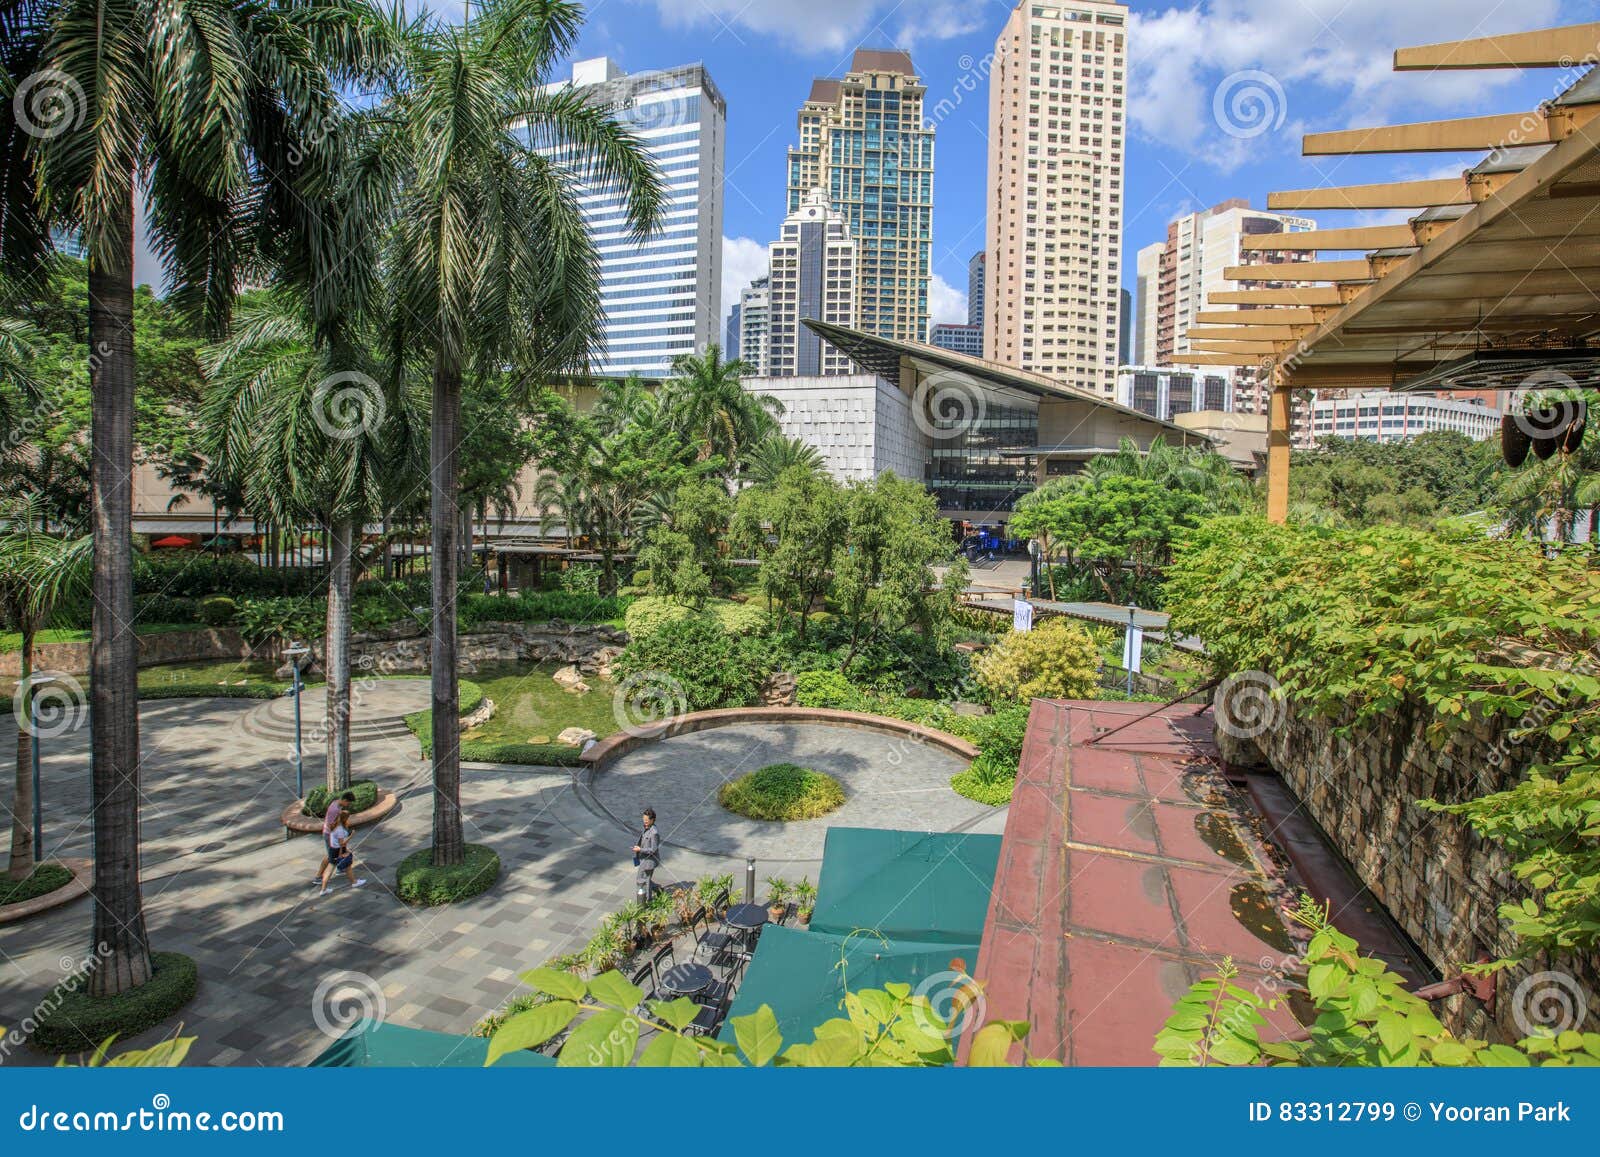 Greenbelt Shopping Mall editorial stock image. Image of business - 83312799